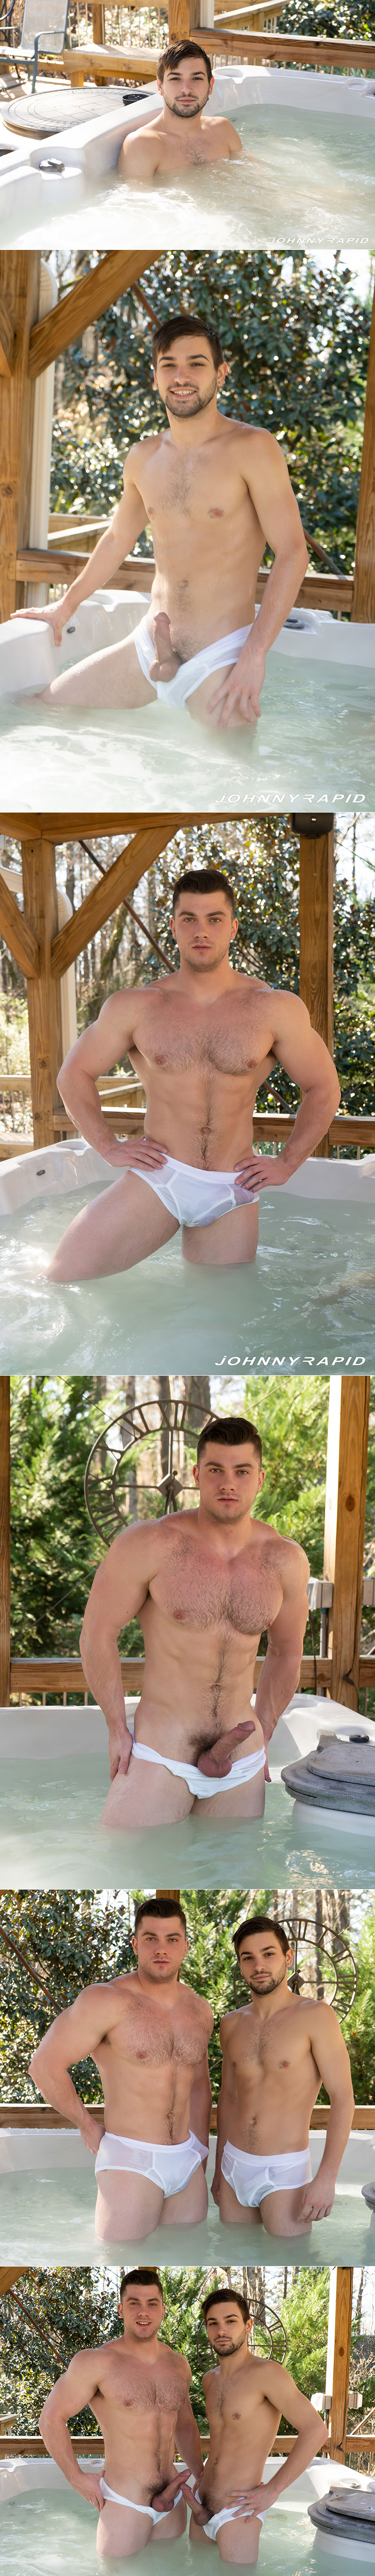 JohnnyRapid: Collin Simpson and Johnny Rapid flip fuck bareback in "Bed and Cock Fest, Part 2"